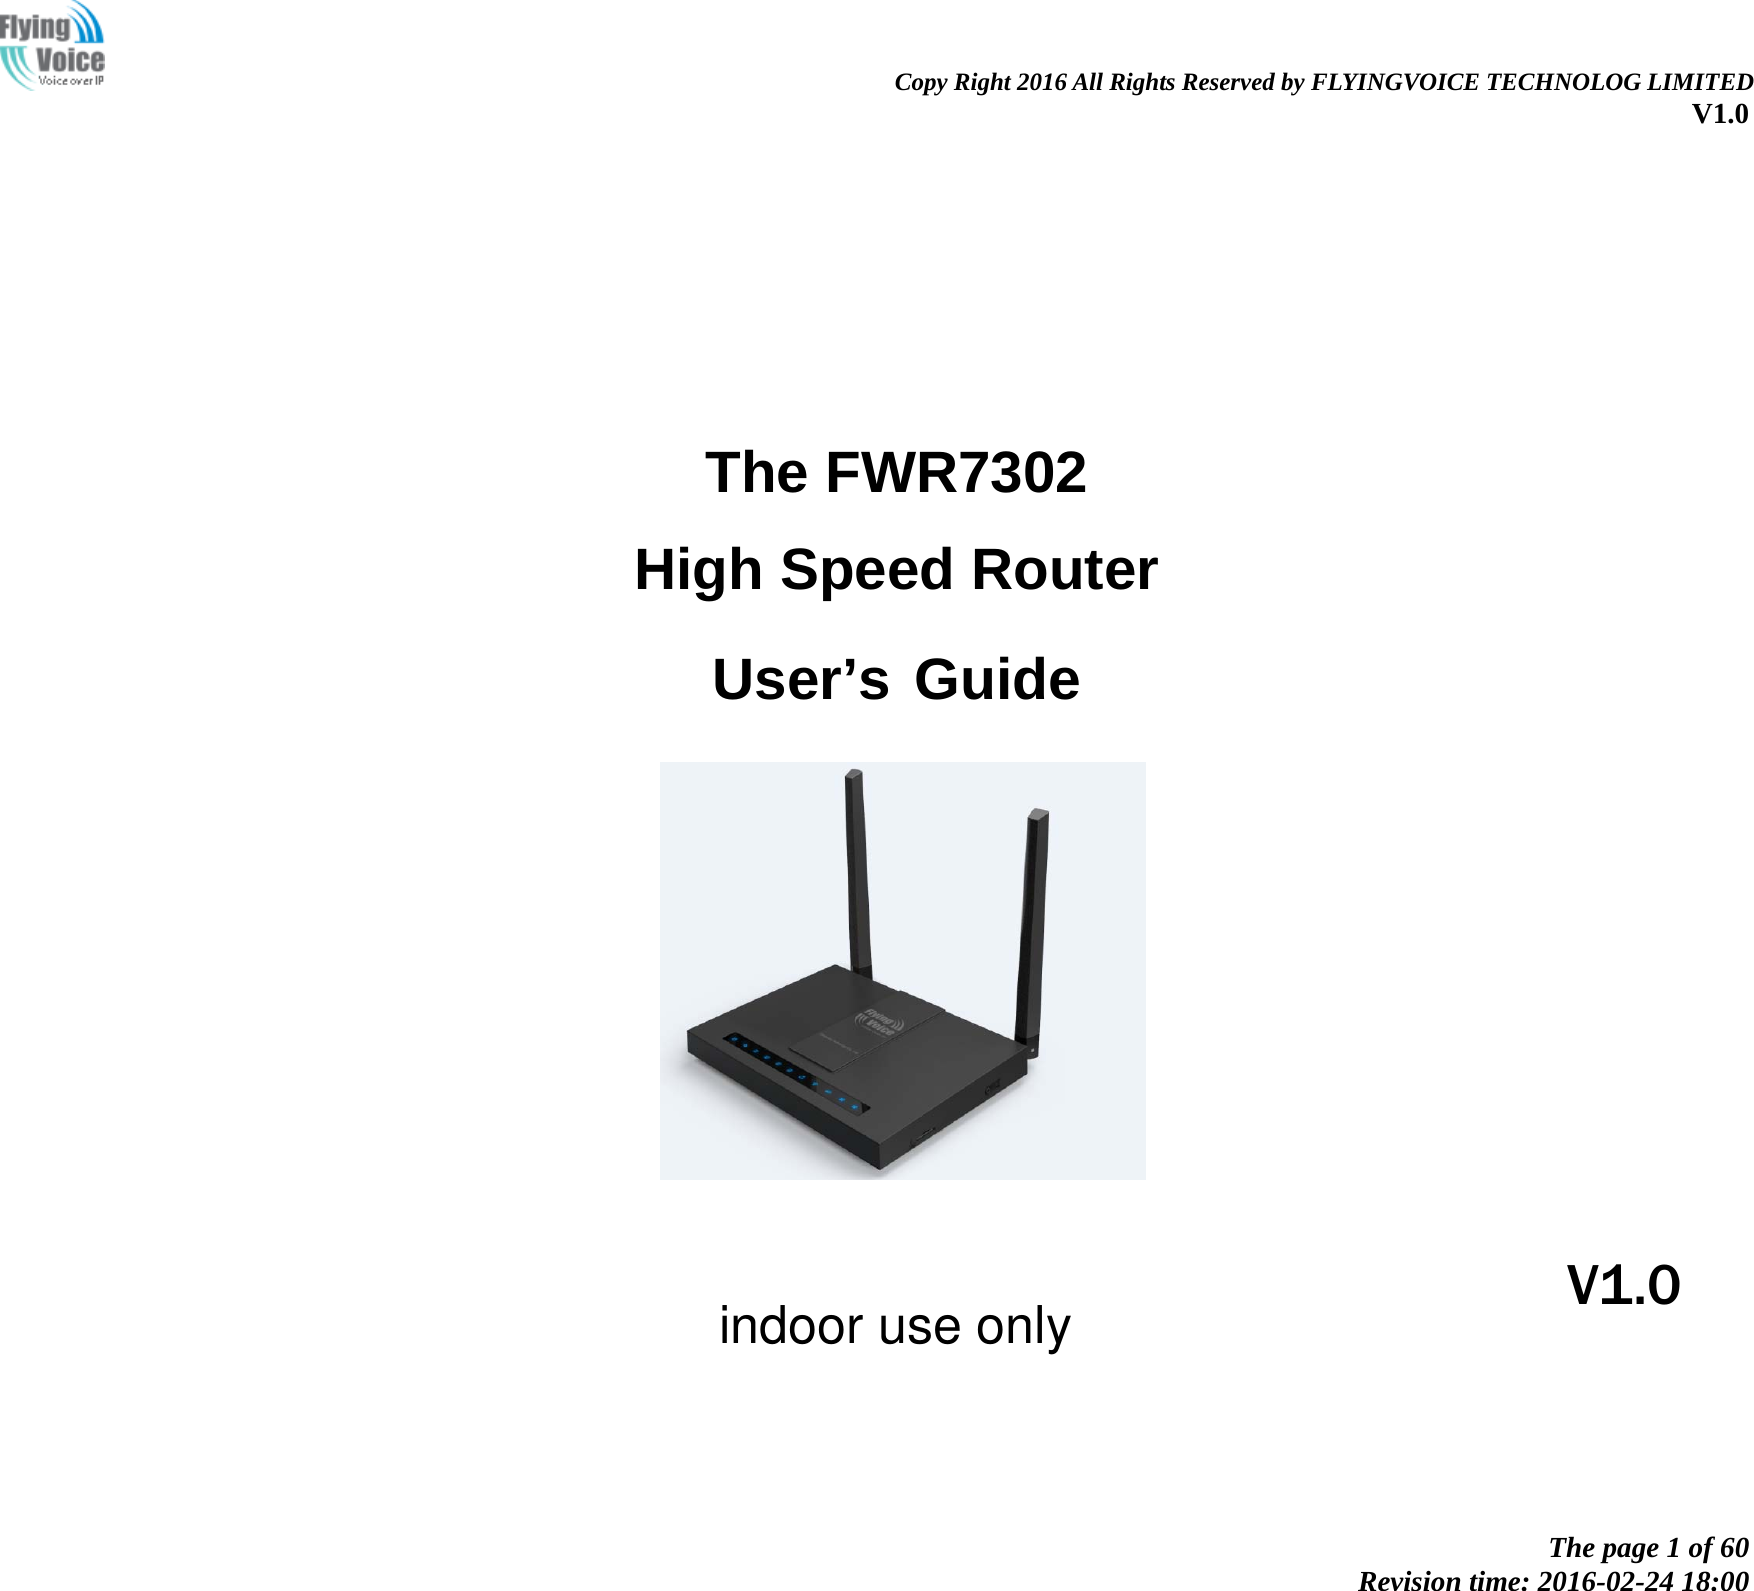                                                                Copy Right 2016 All Rights Reserved by FLYINGVOICE TECHNOLOG LIMITED V1.0 The page 1 of 60 Revision time: 2016-02-24 18:00       The FWR7302 High Speed Router  User’s Guide                  V1.0 indoor use only